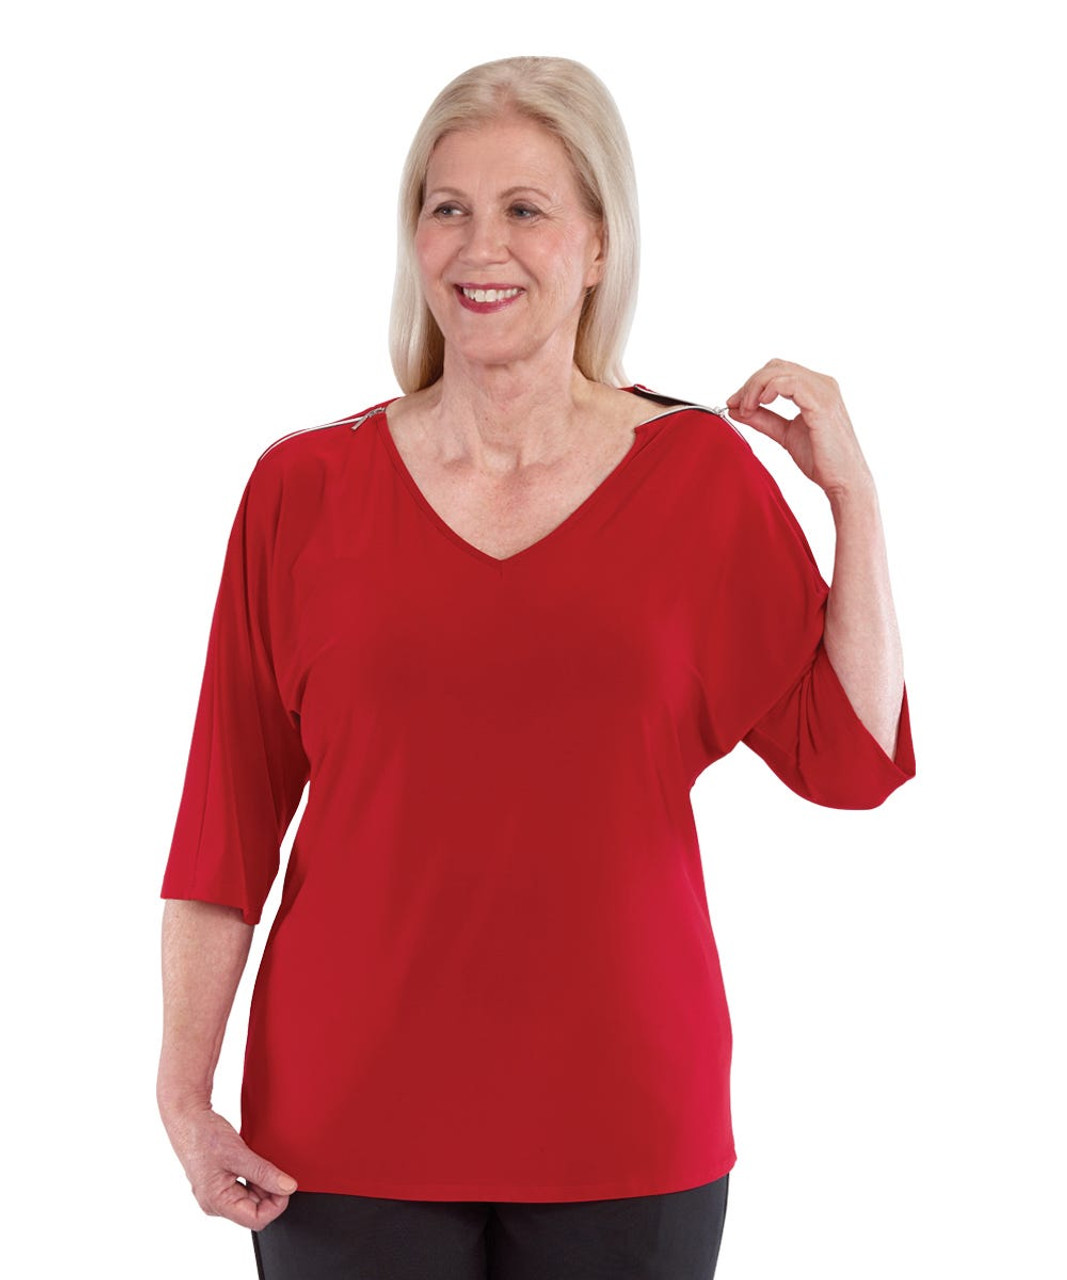 Silverts SV41060 Zip-Shoulders Top For Women Candy Apple, Size=XL, SV41060-SV1319-XL